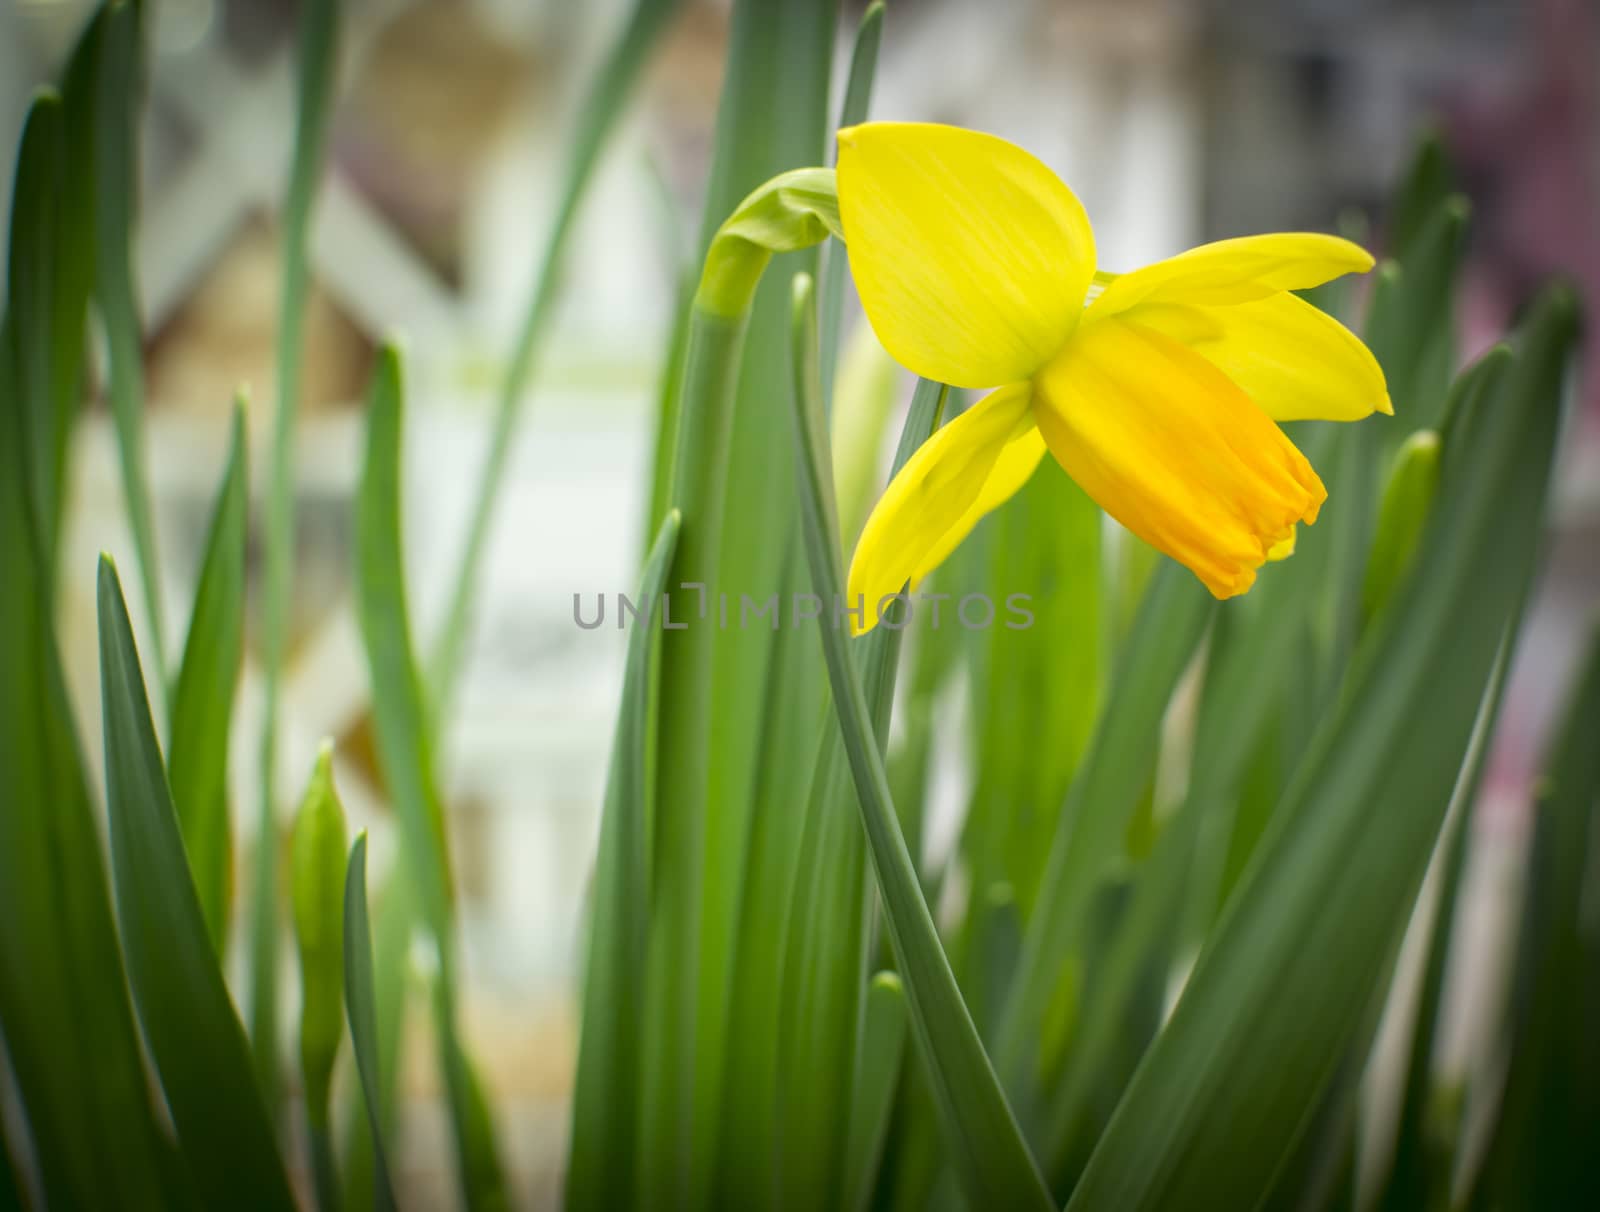 Single yellow daffodil turned to the right and green leaves.